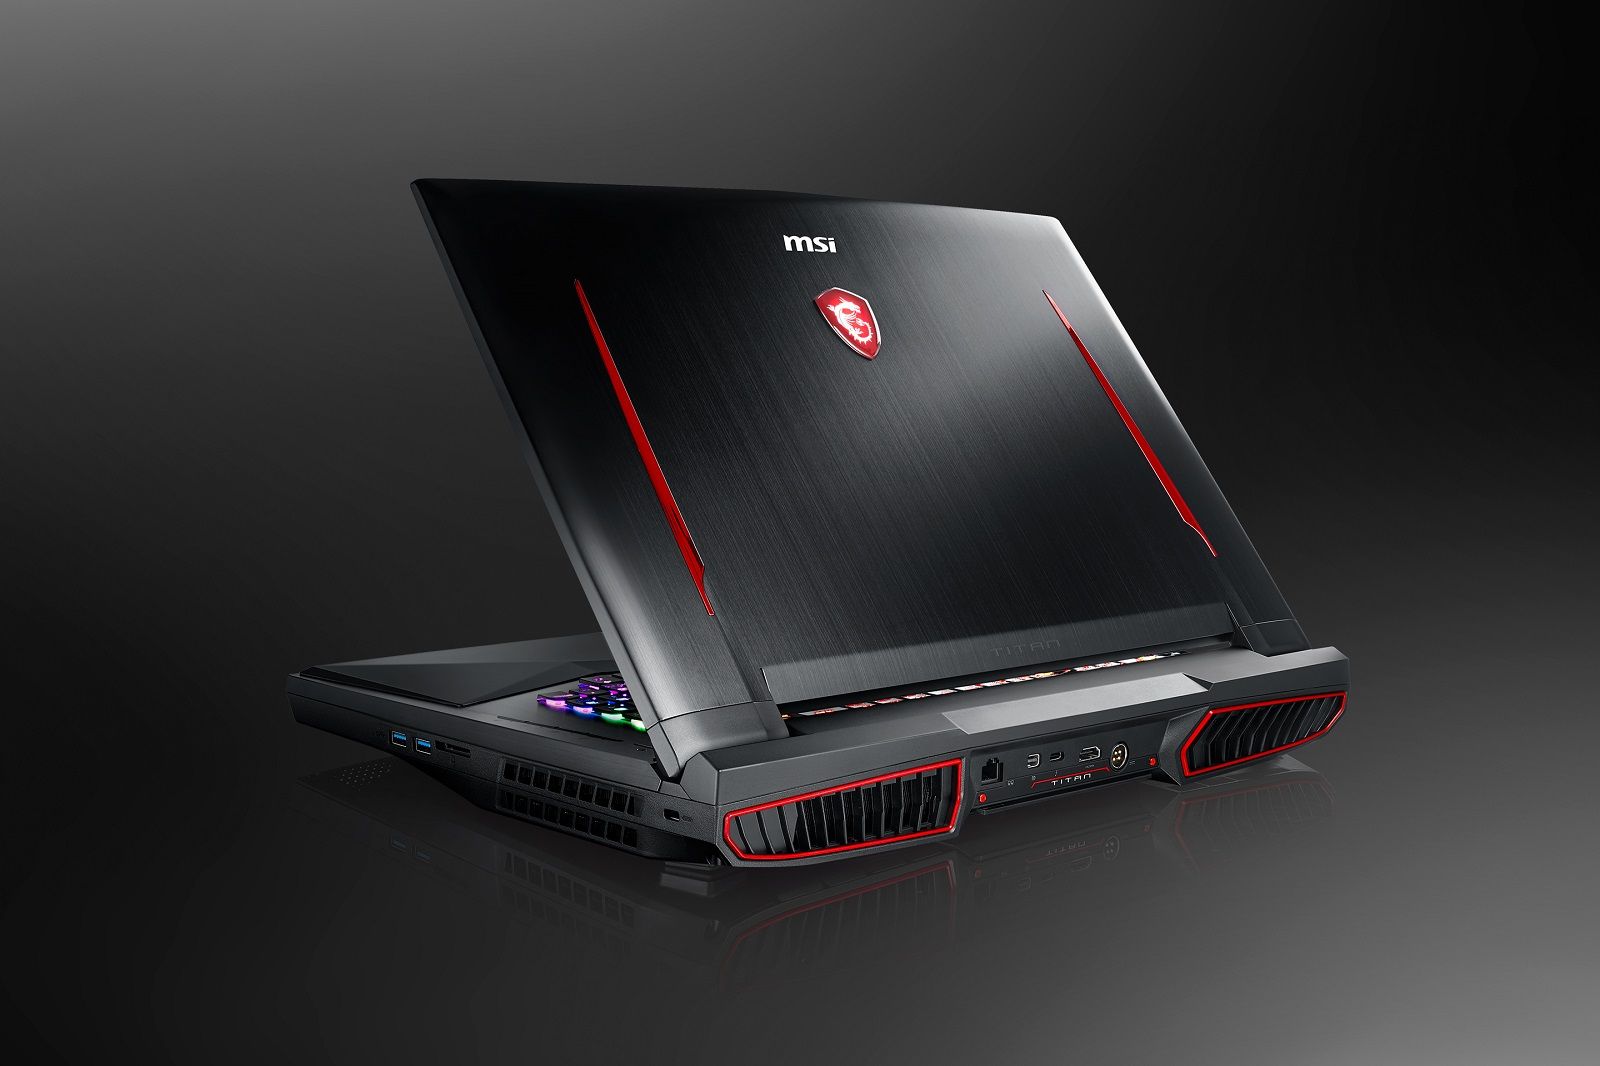 MSI unveils new line of gaming laptops including the world’s first Intel Core i9 powered laptop image 1